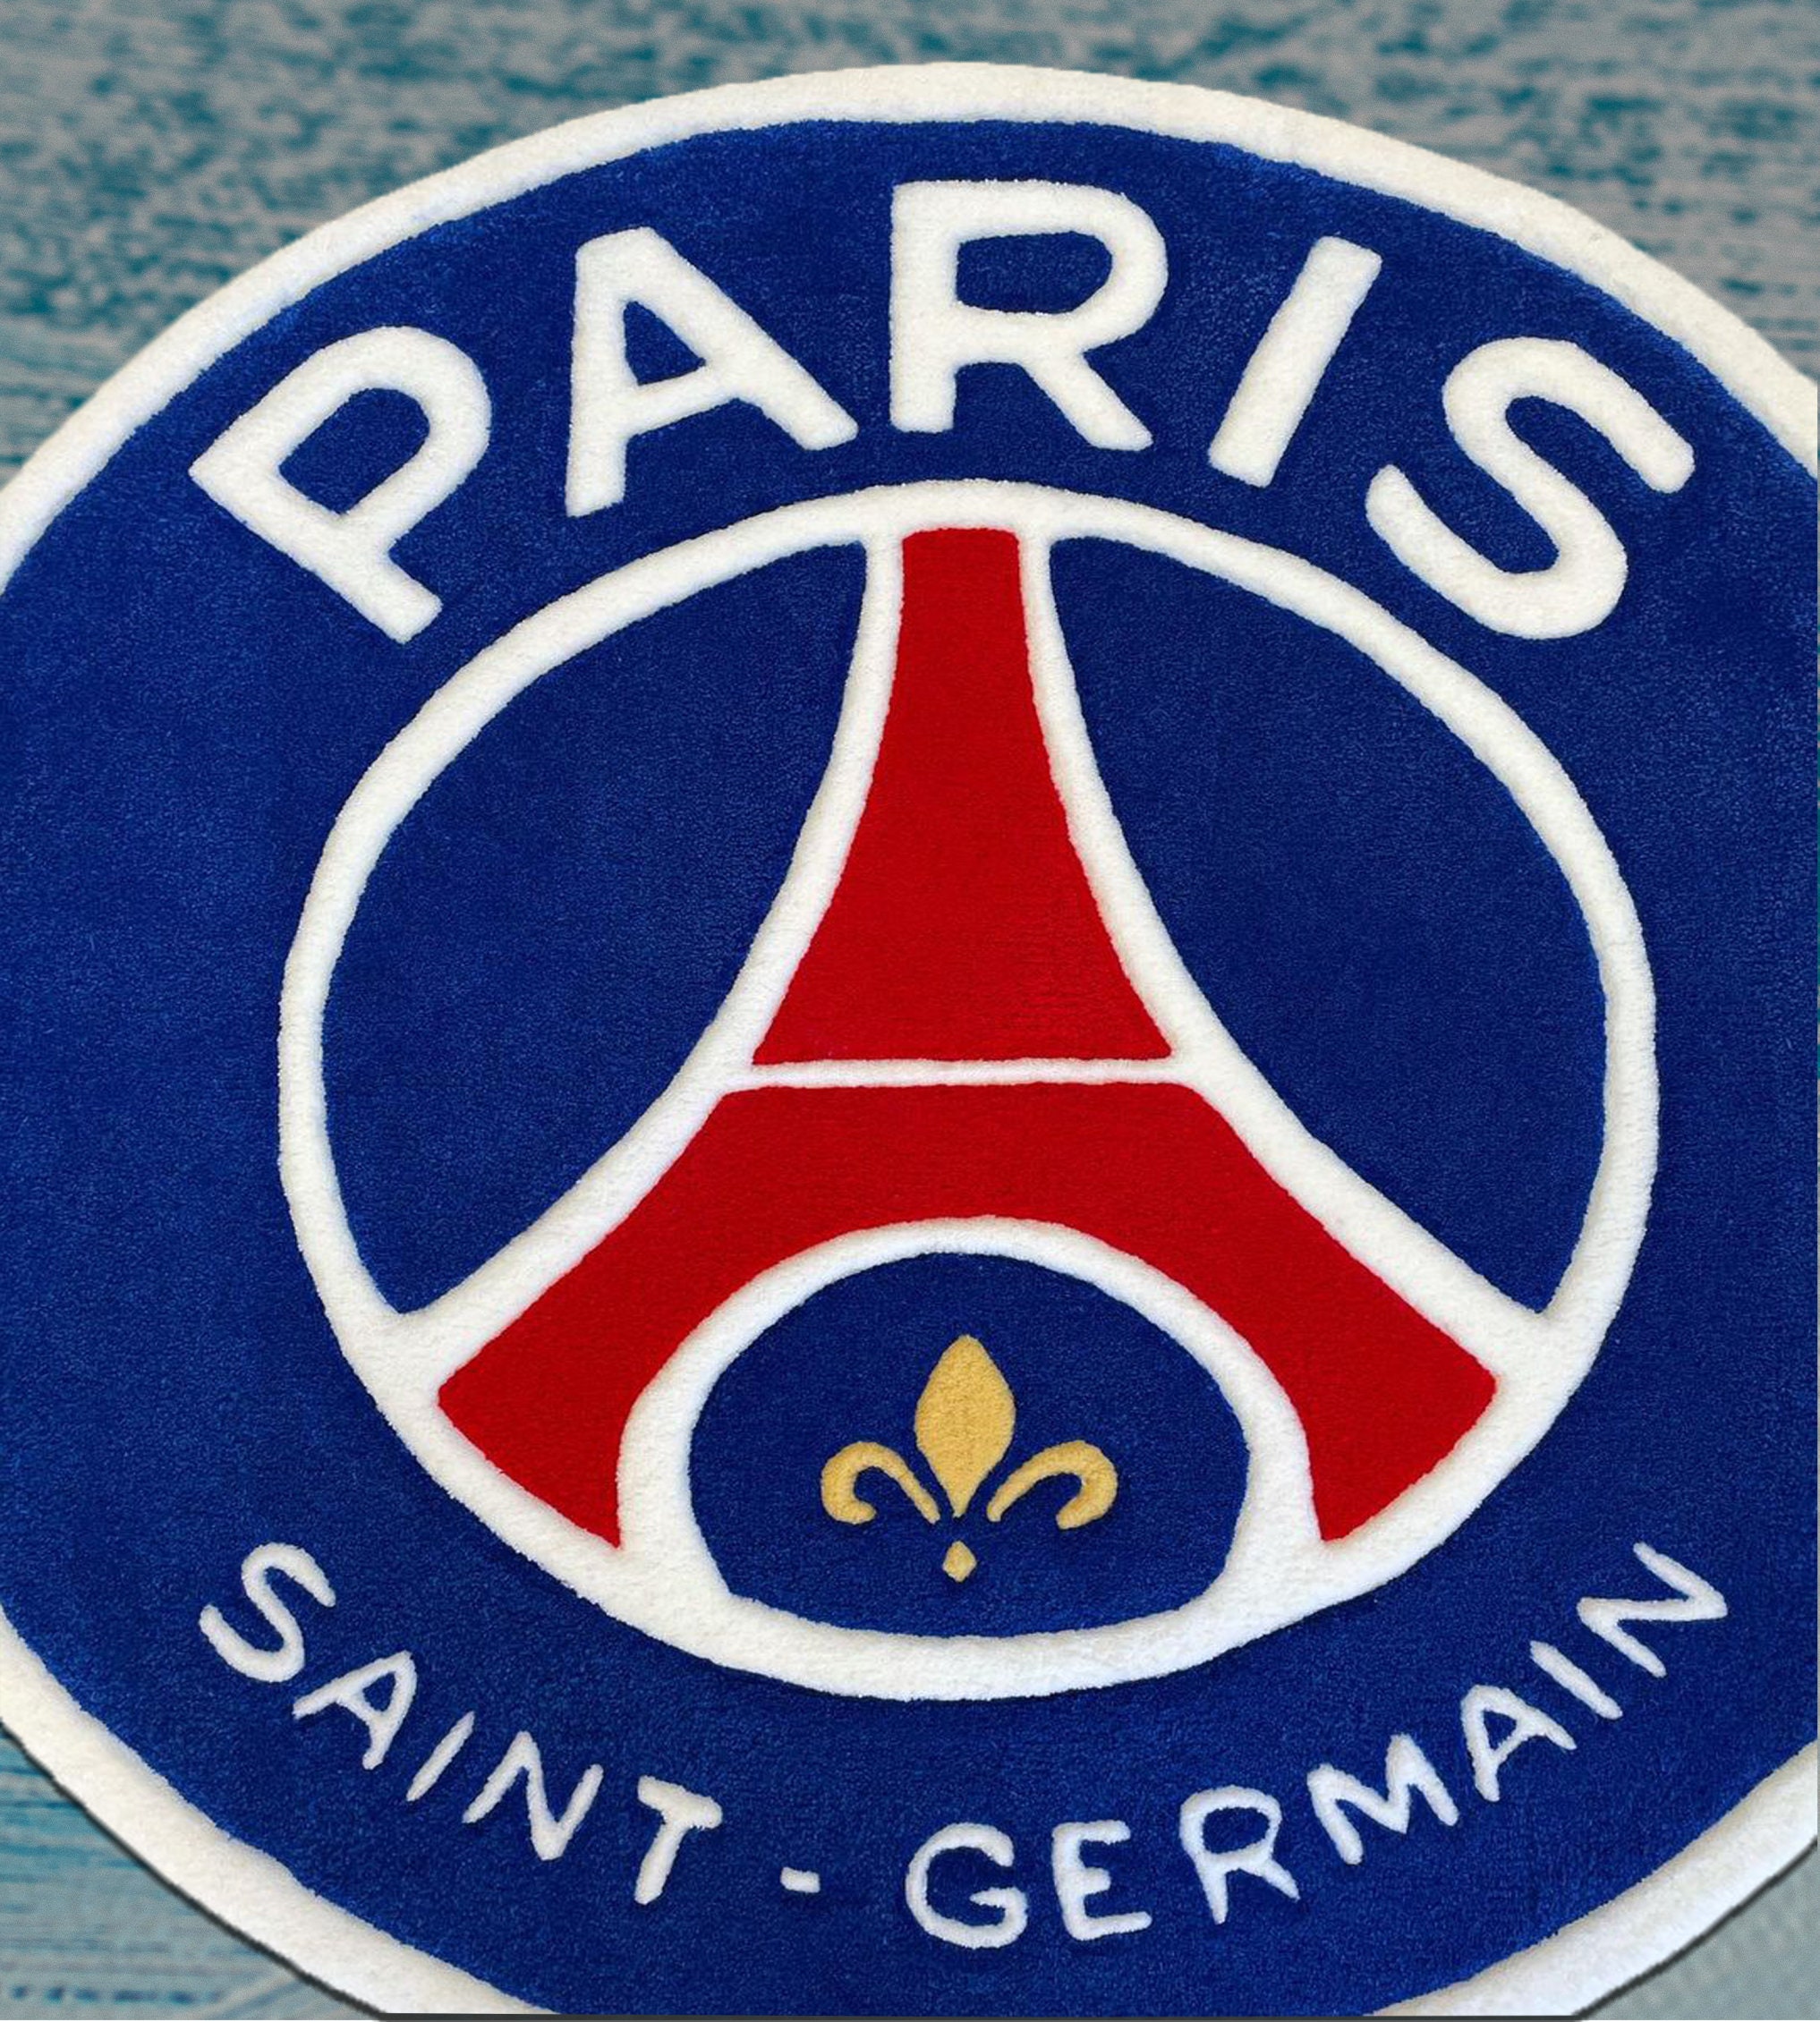 Paris Saint Germain FC Rug,non-slip,high Quality Microfiber Polyester  Feathers Personalizedrug,living Room Rug,all Size and Shapes -   Australia